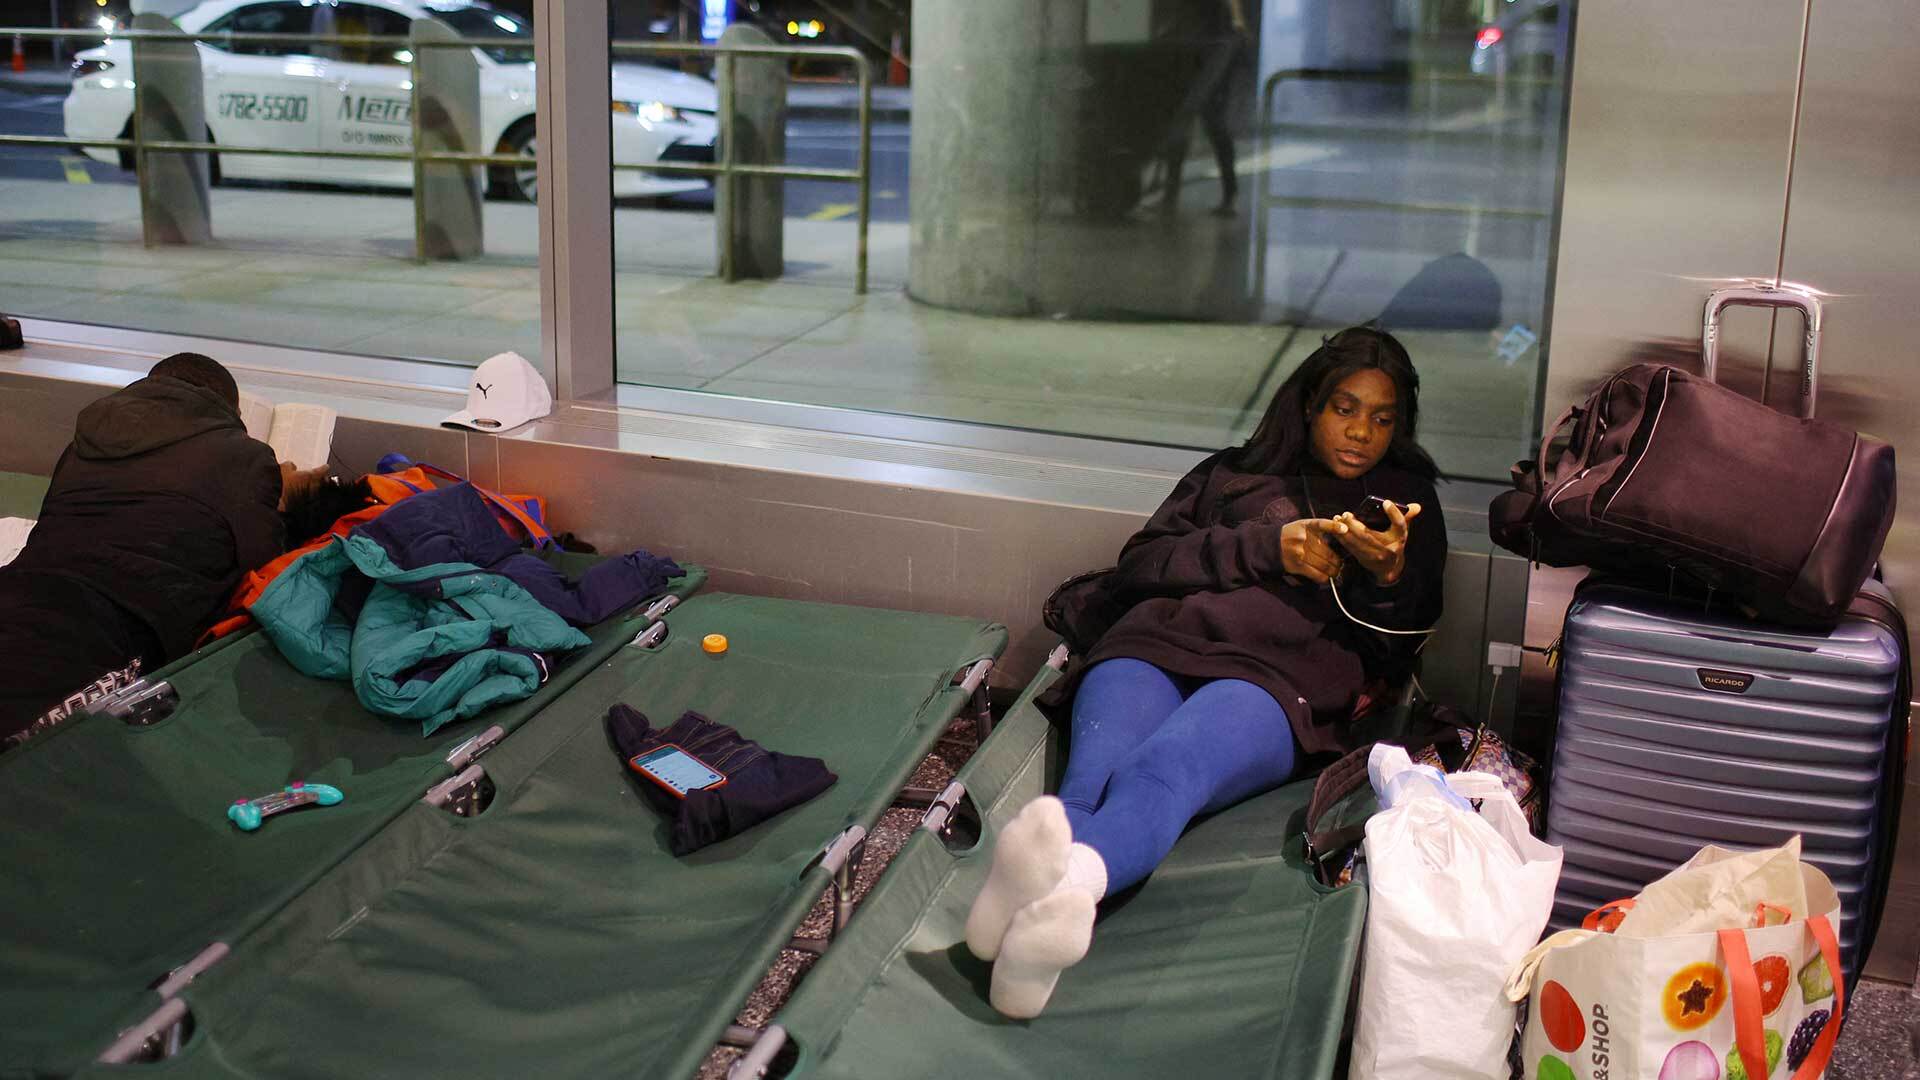 Starting July 9, migrant families sheltering at Boston’s Logan International Airport will no longer be allowed to sleep there.